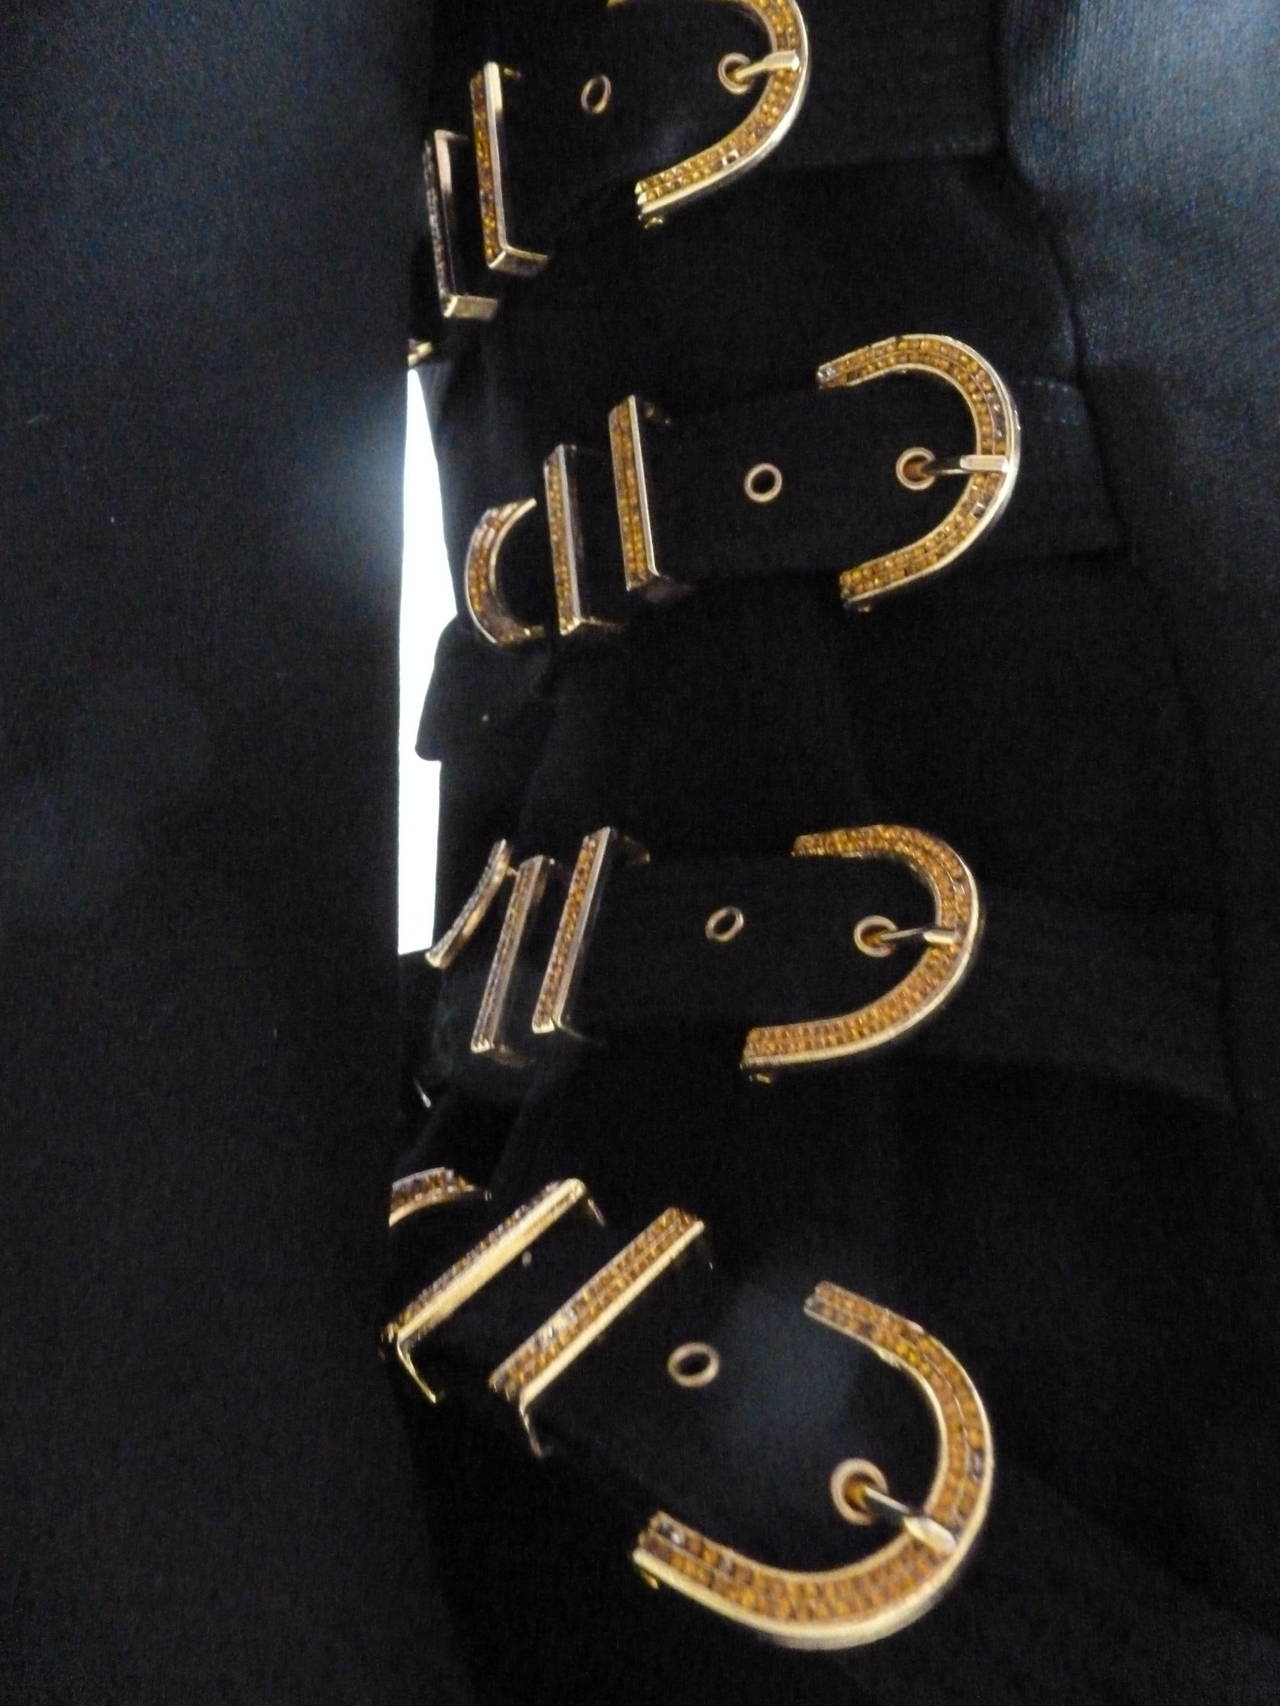 Gianni Versace Couture black silk and wool buckle bondage jacket from the Fall 1992 Bondage collection. The jacket is secured at the front by a series of gold-tone metal with gold strass buttons. The silk bondage buckles to each side feature